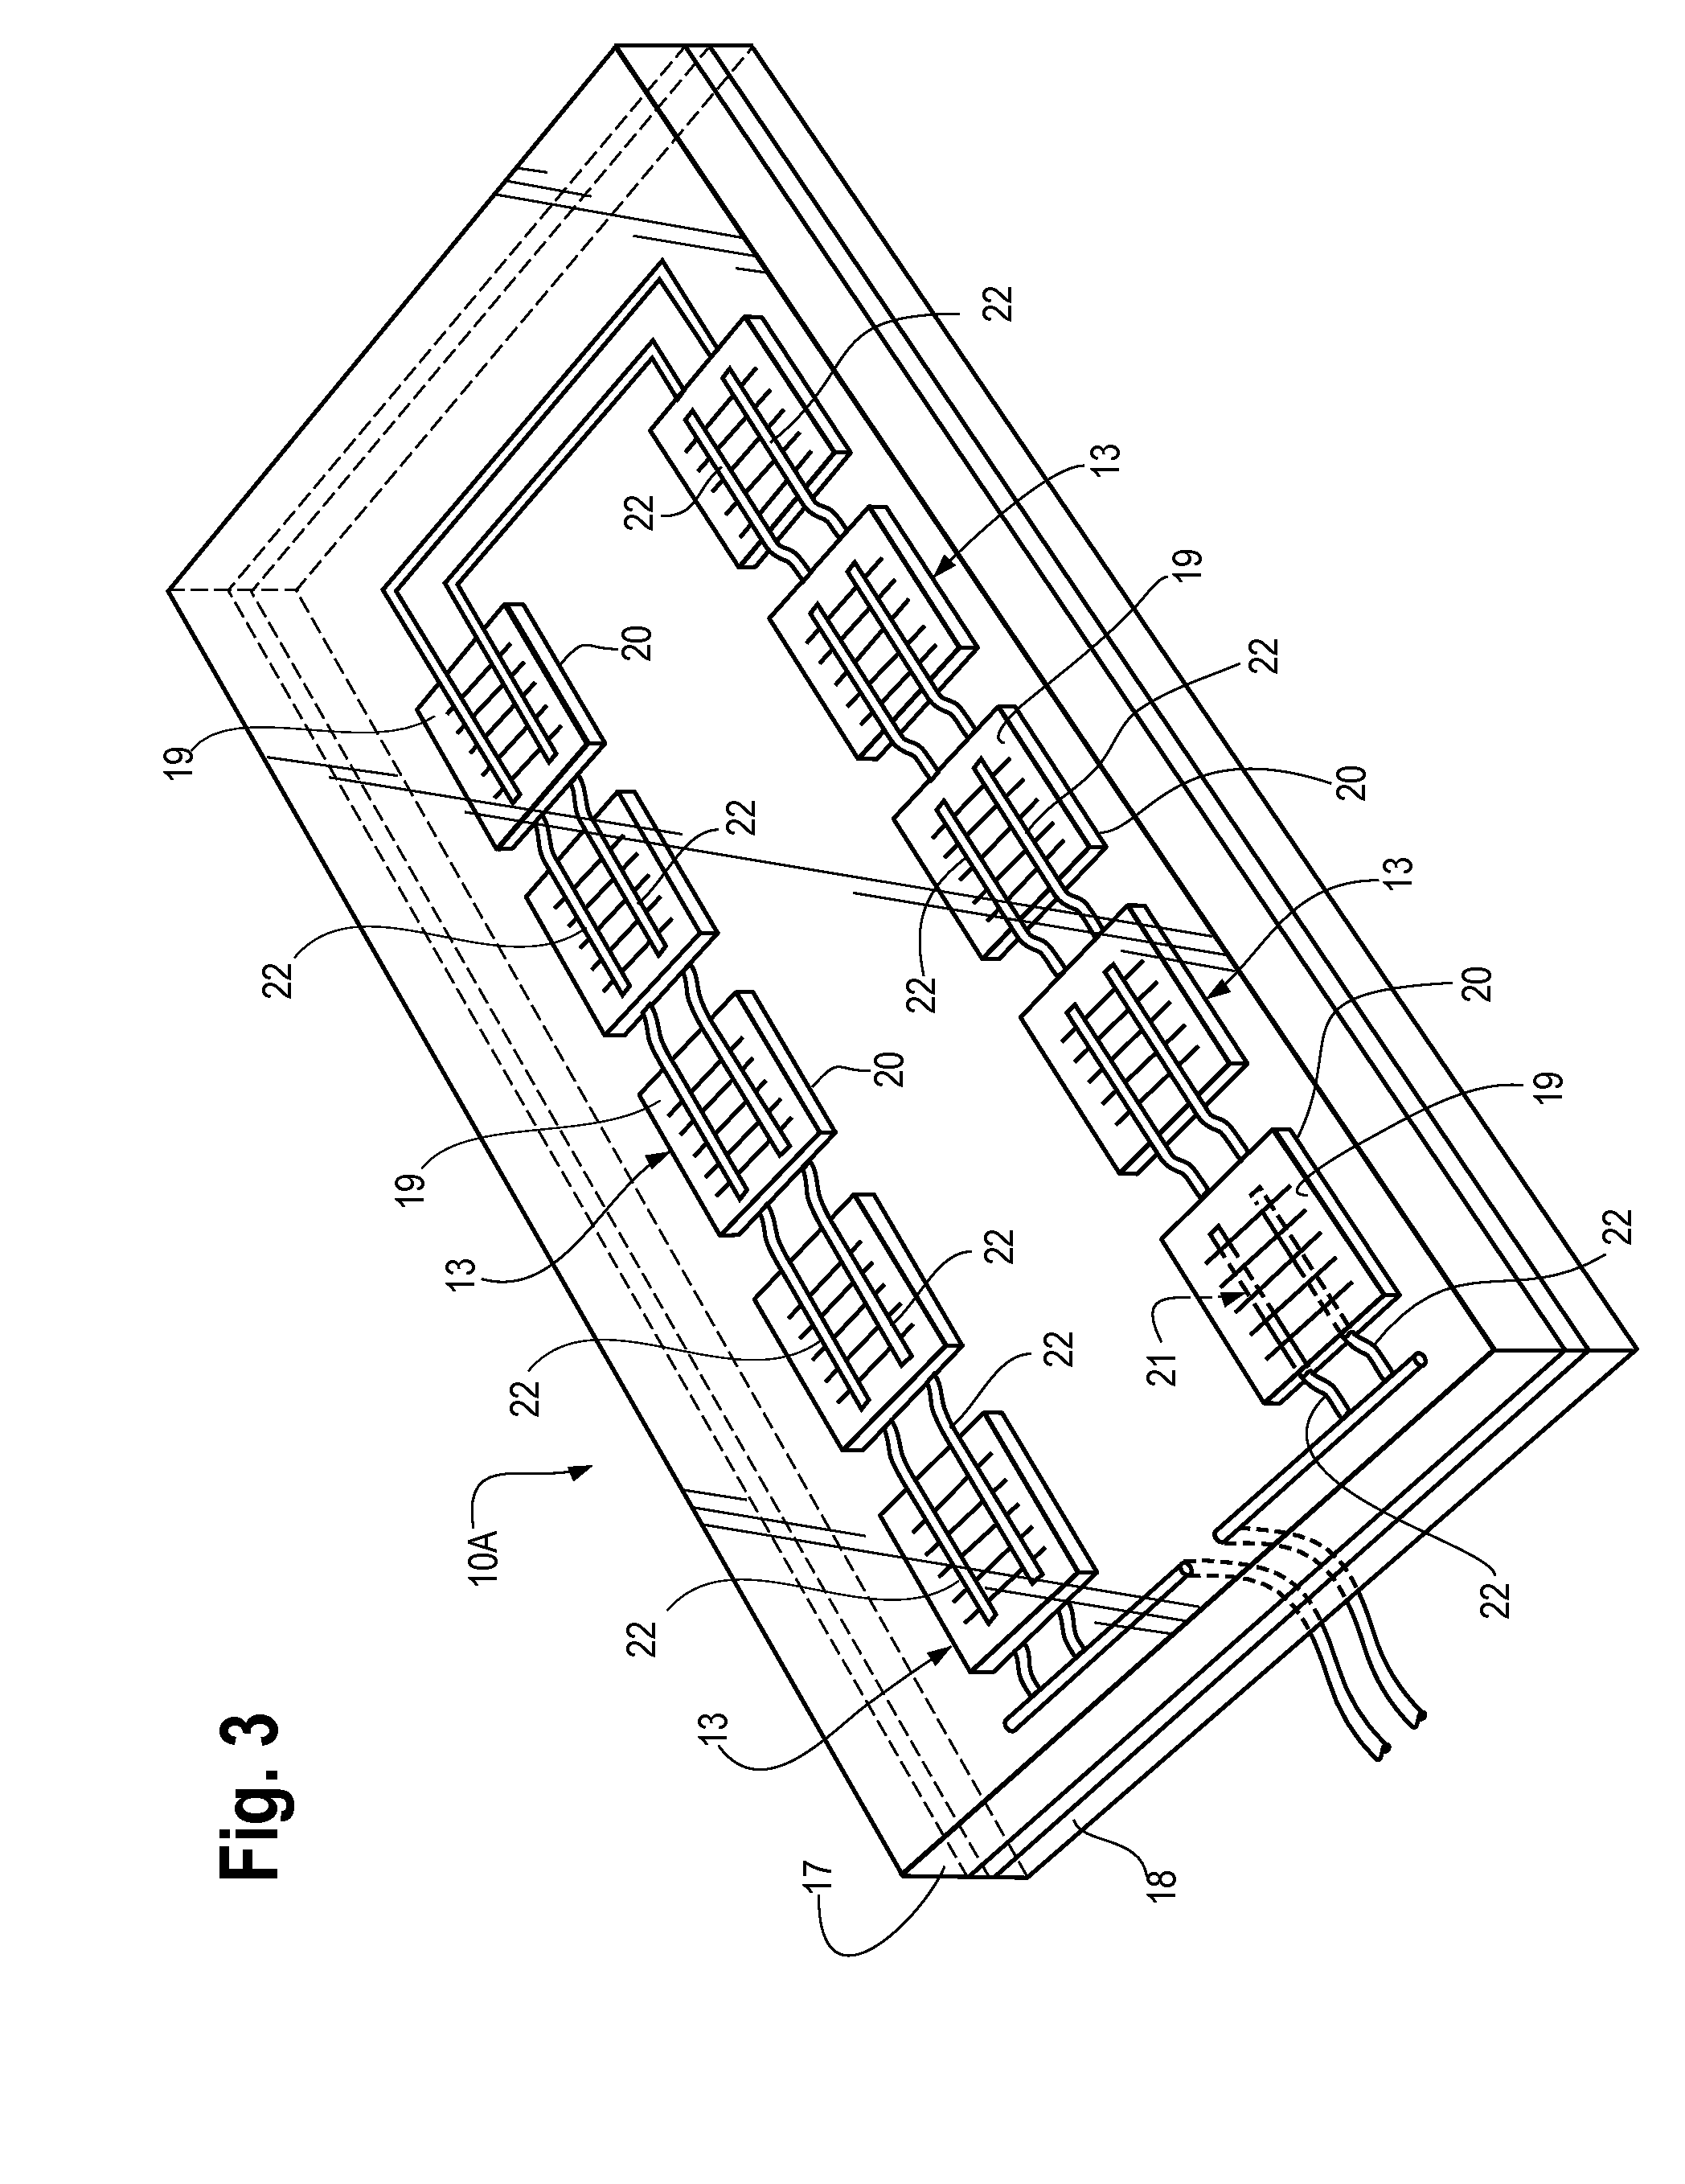 Means and Method for Electrically Connecting Photovoltaic Cells in a Solar Module